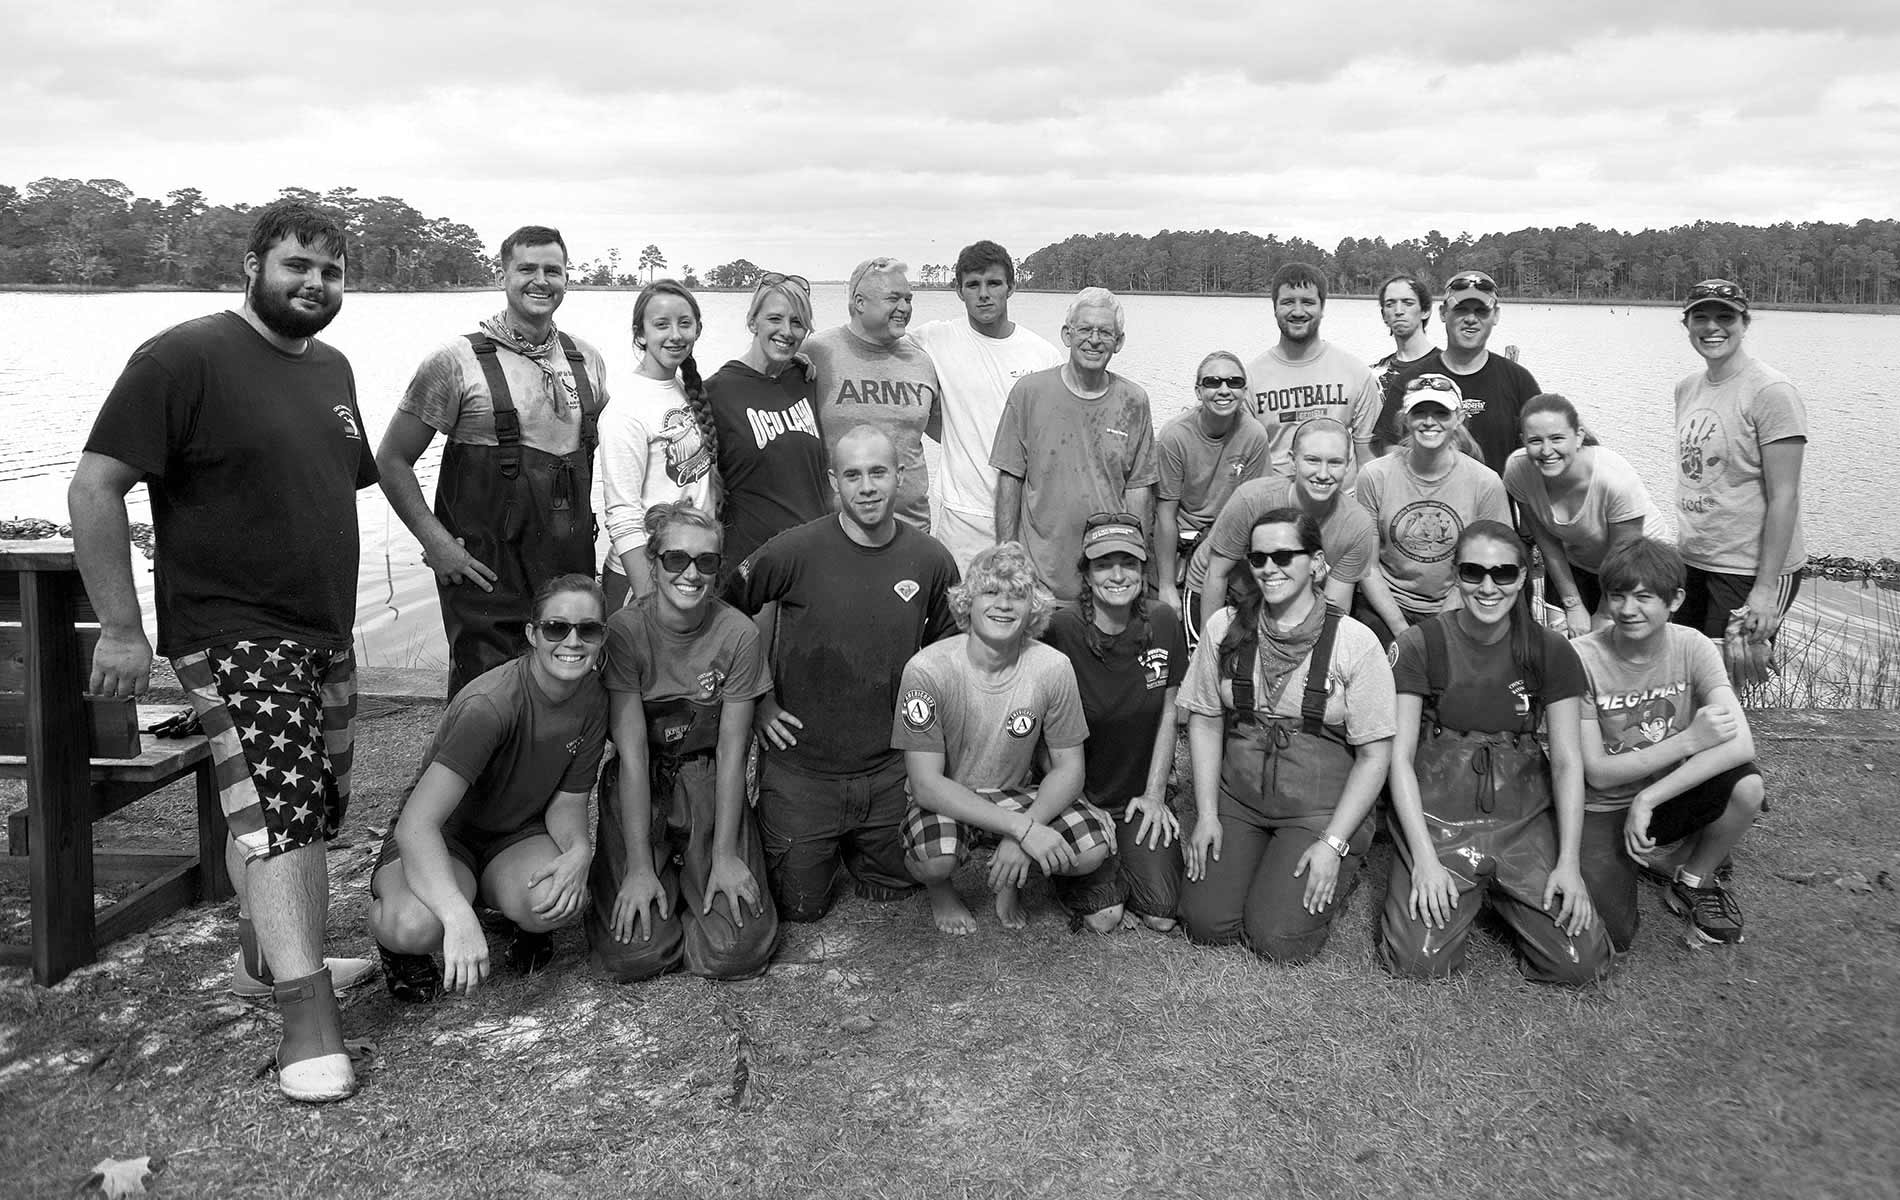 The Choctawhatchee Basin Alliance, a 2015 grant finalist